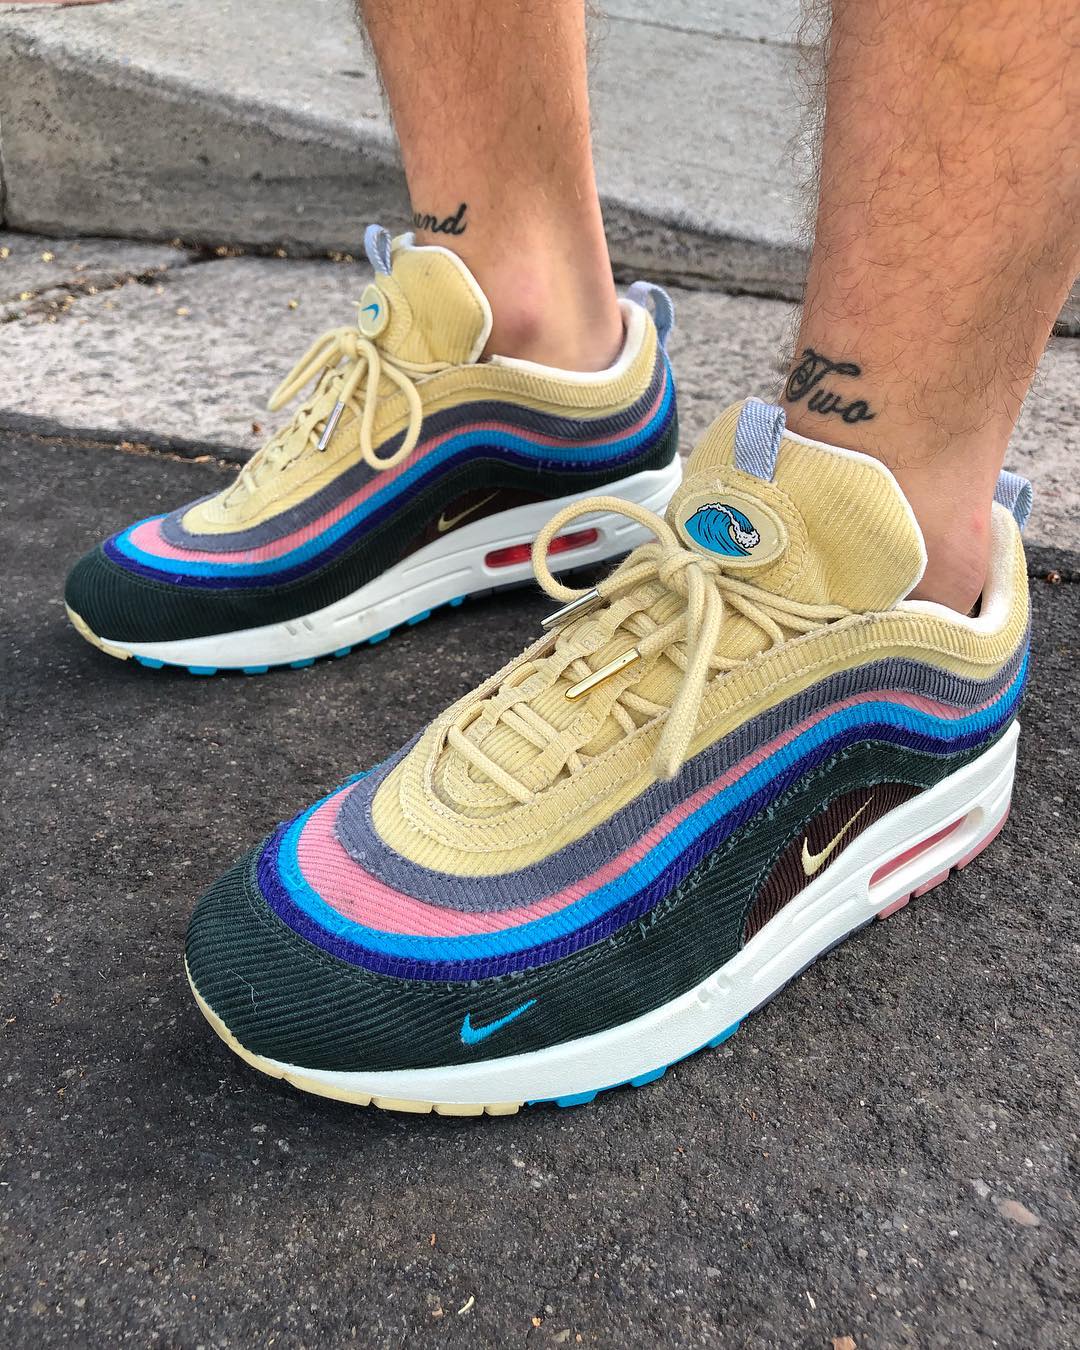 Sean Wotherspoon's Nike Air Max Hybrid Is Releasing Early | Complex